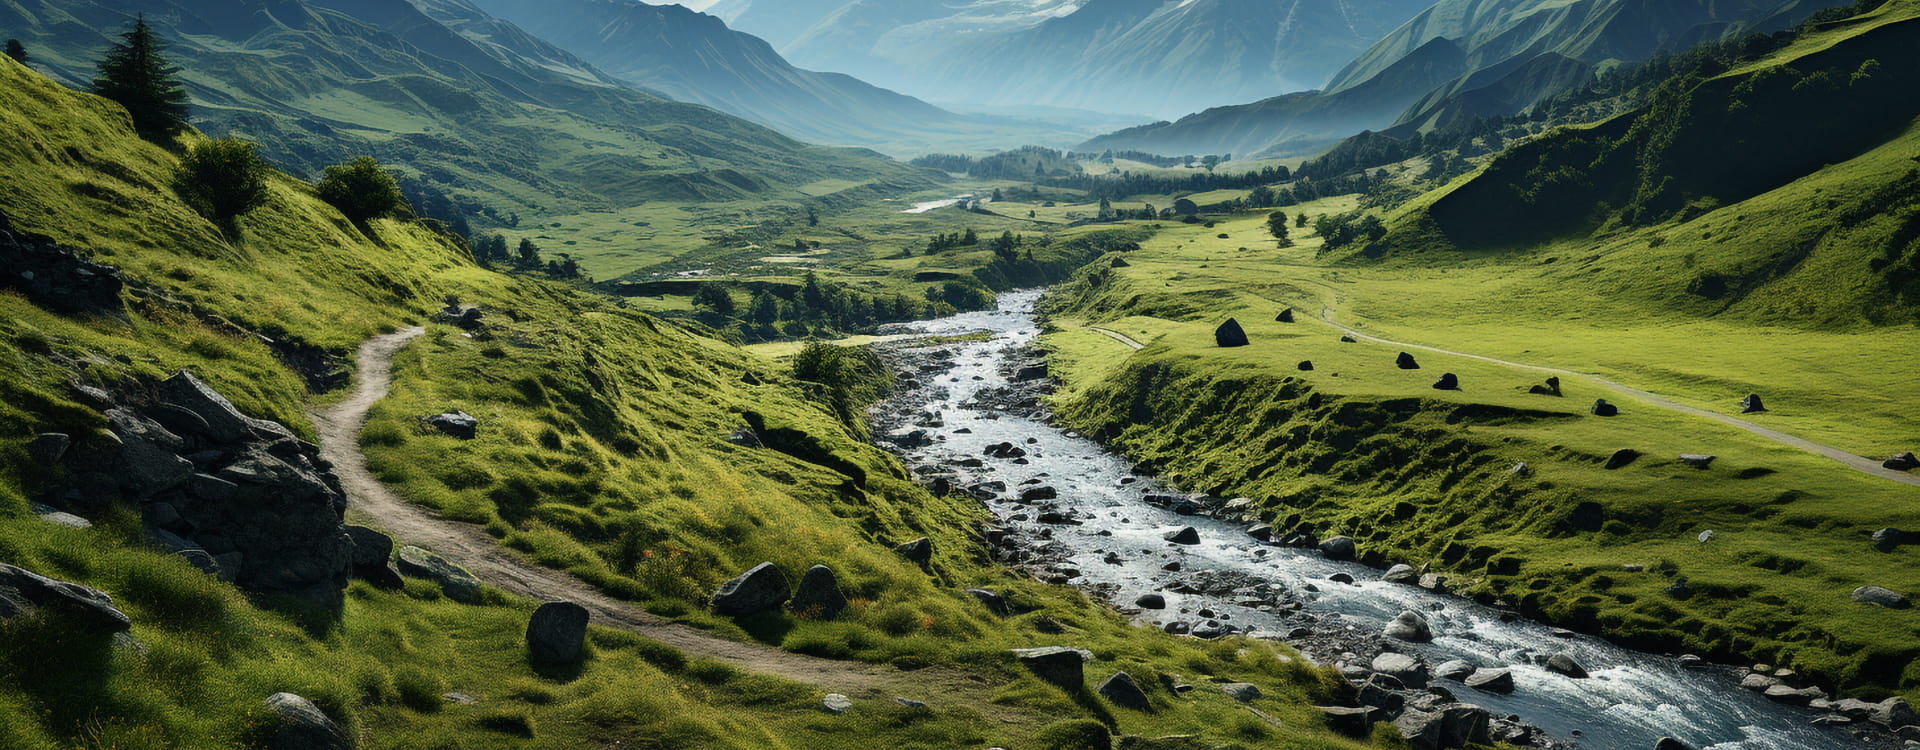 Panoramic view of a green meadow with a river and mountains in the background.